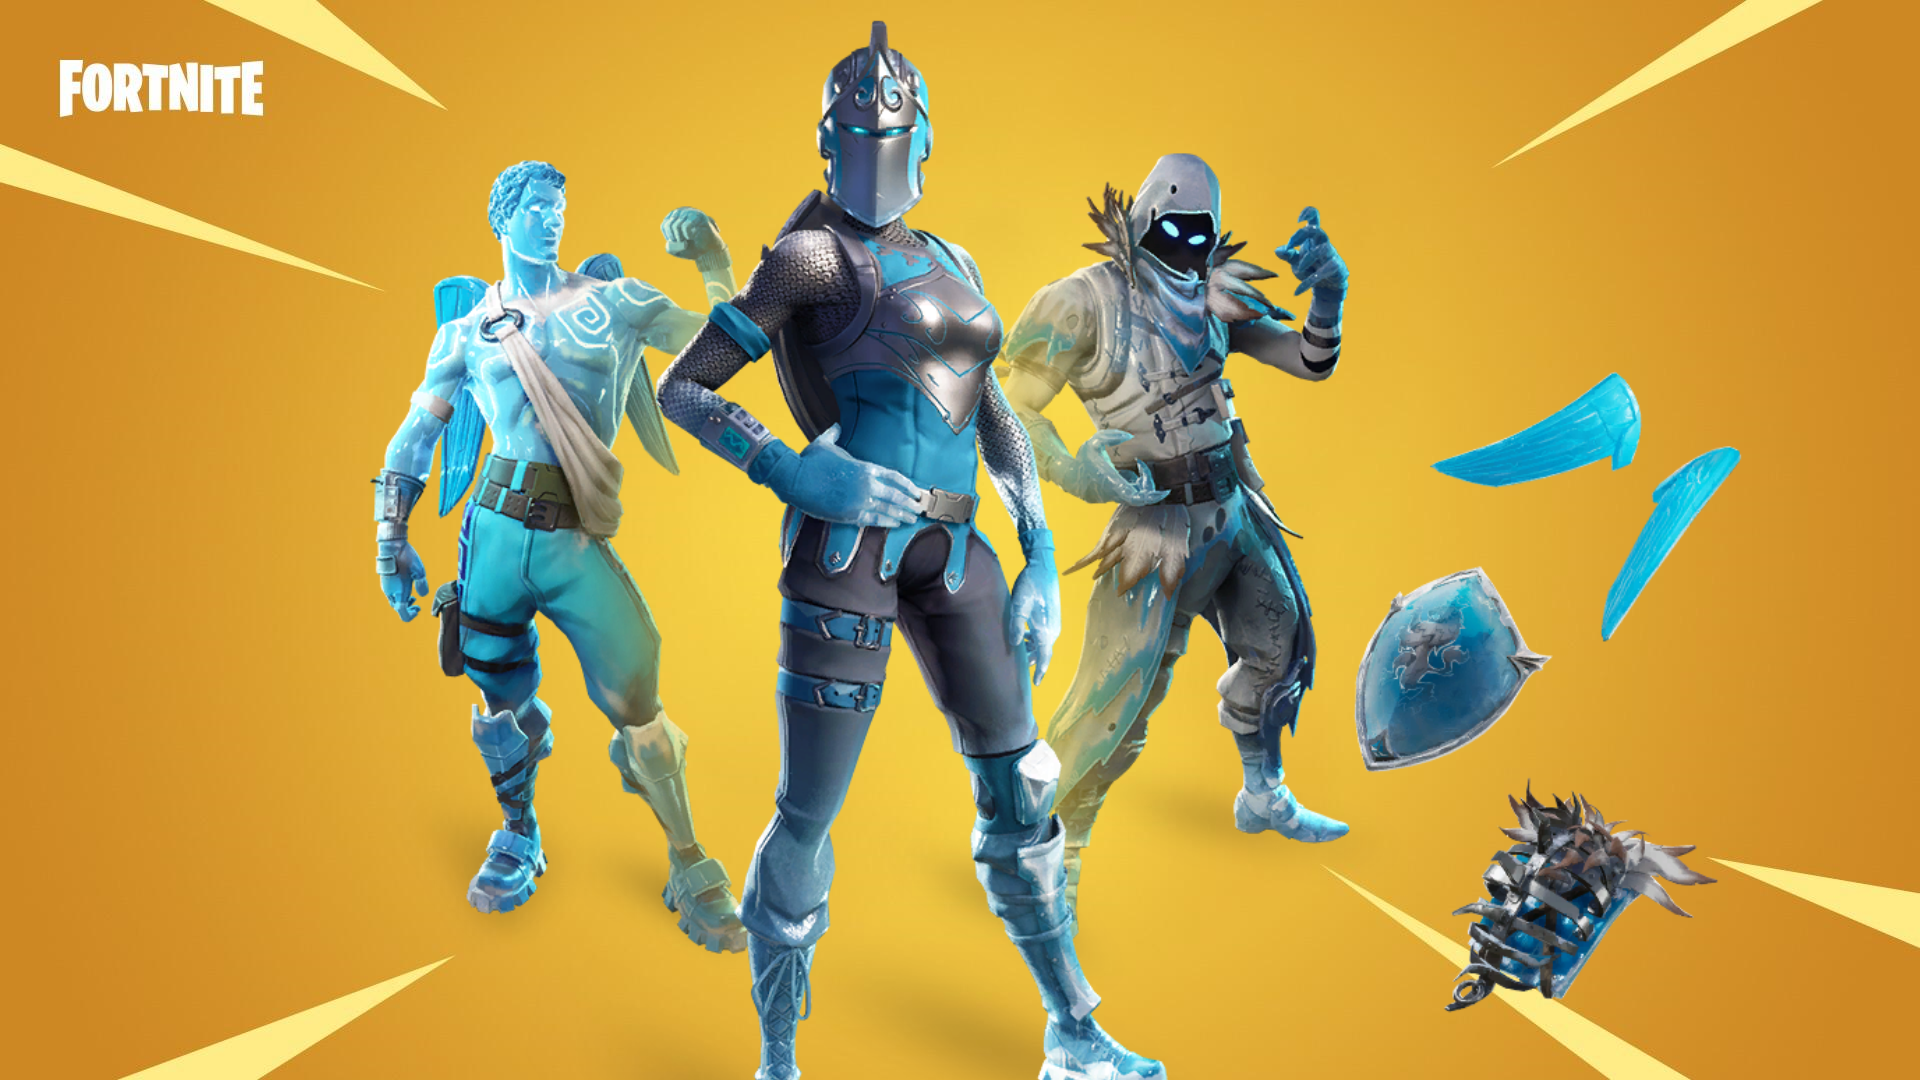 the frozen legends bundle might be on sale for real money only leaks show - fortnite leaked bundle